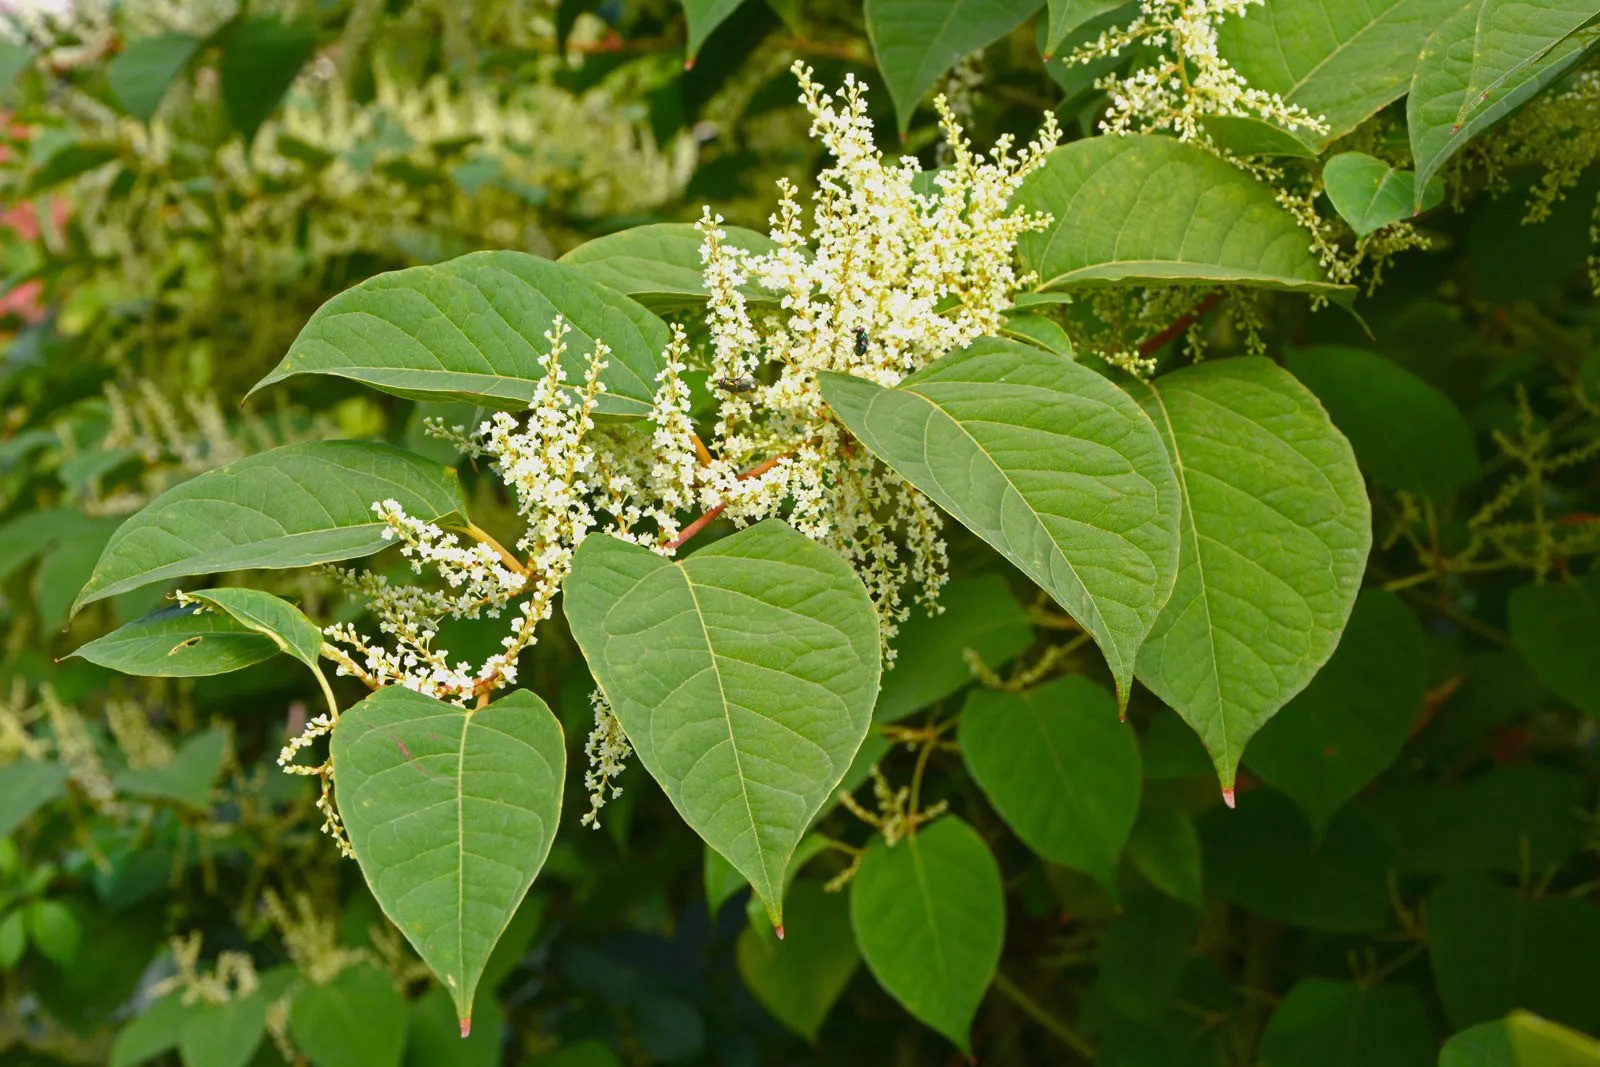 The Impact of Knotweed on Ecosystems and Biodiversity